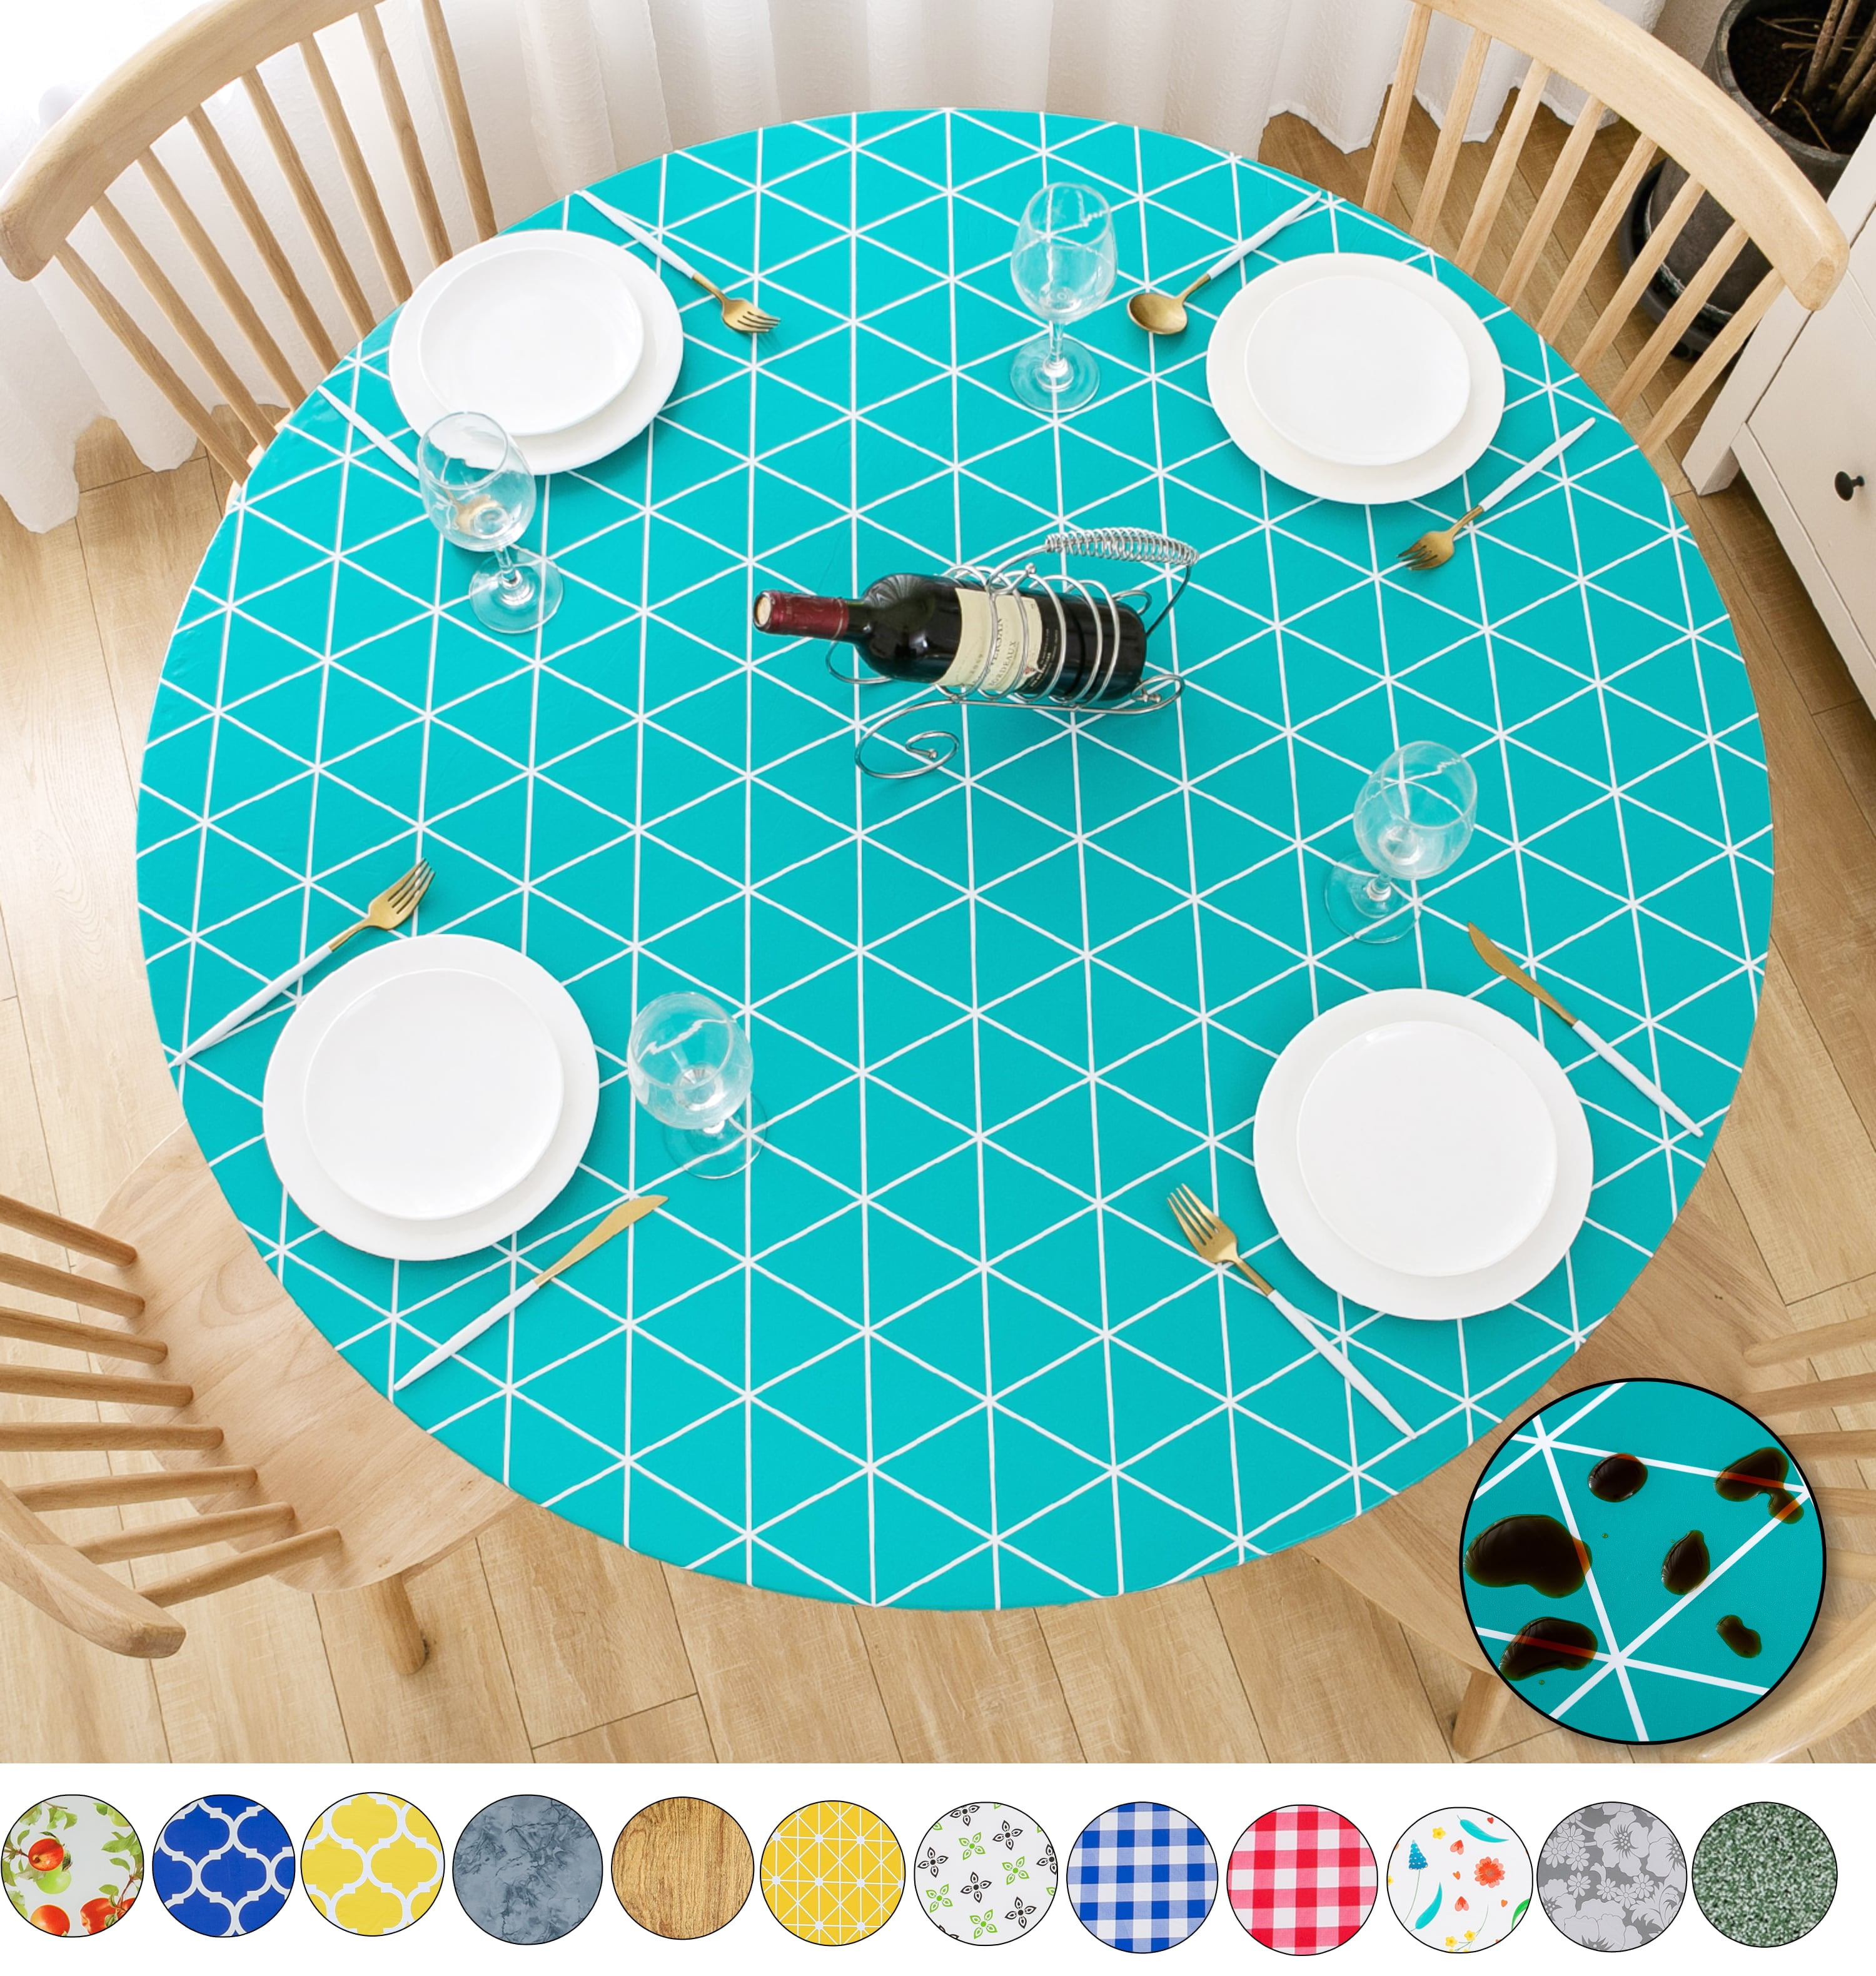 for 40-56 Diameter Black Plaid Suitable for 40-44in diameter Baoblaze Home Indoor Outdoor Patio Round Fitted Vinyl Tablecloth Waterproof Wipeable Plastic PVC Cover Flannel Backing Elastic Edge